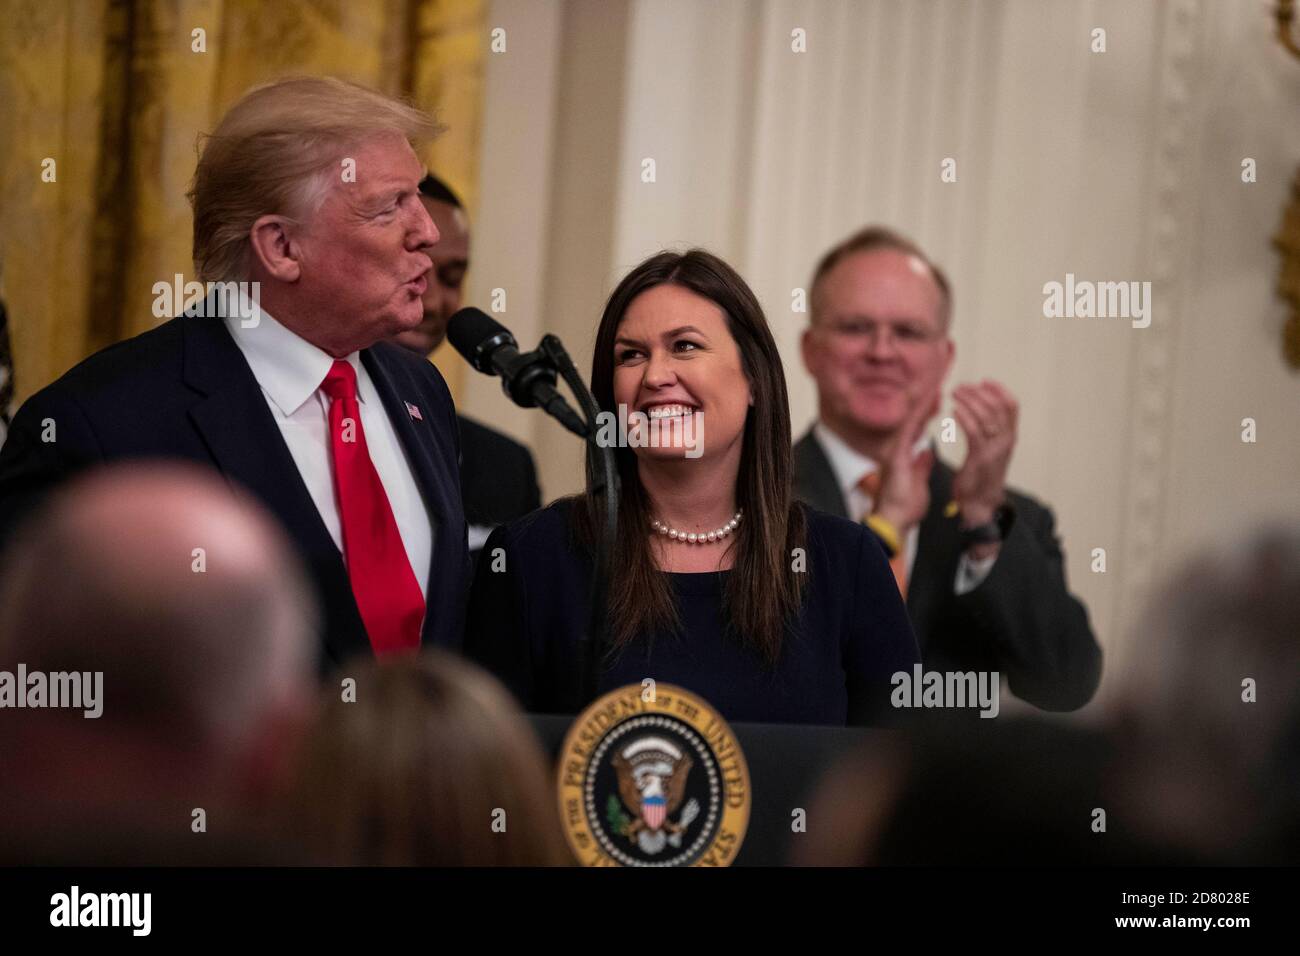 U.S. President Donald Trump speaks as he embraces outgoing White House Press Secretary Sarah Huckabee Sanders as delivers remarks about prison reform in the East Room of the White House in Washington, D.C. on June 13, 2019. Sanders announced today that she will be leaving the White House at the end of the month. Credit: Alex Edelman/The Photo Access Stock Photo